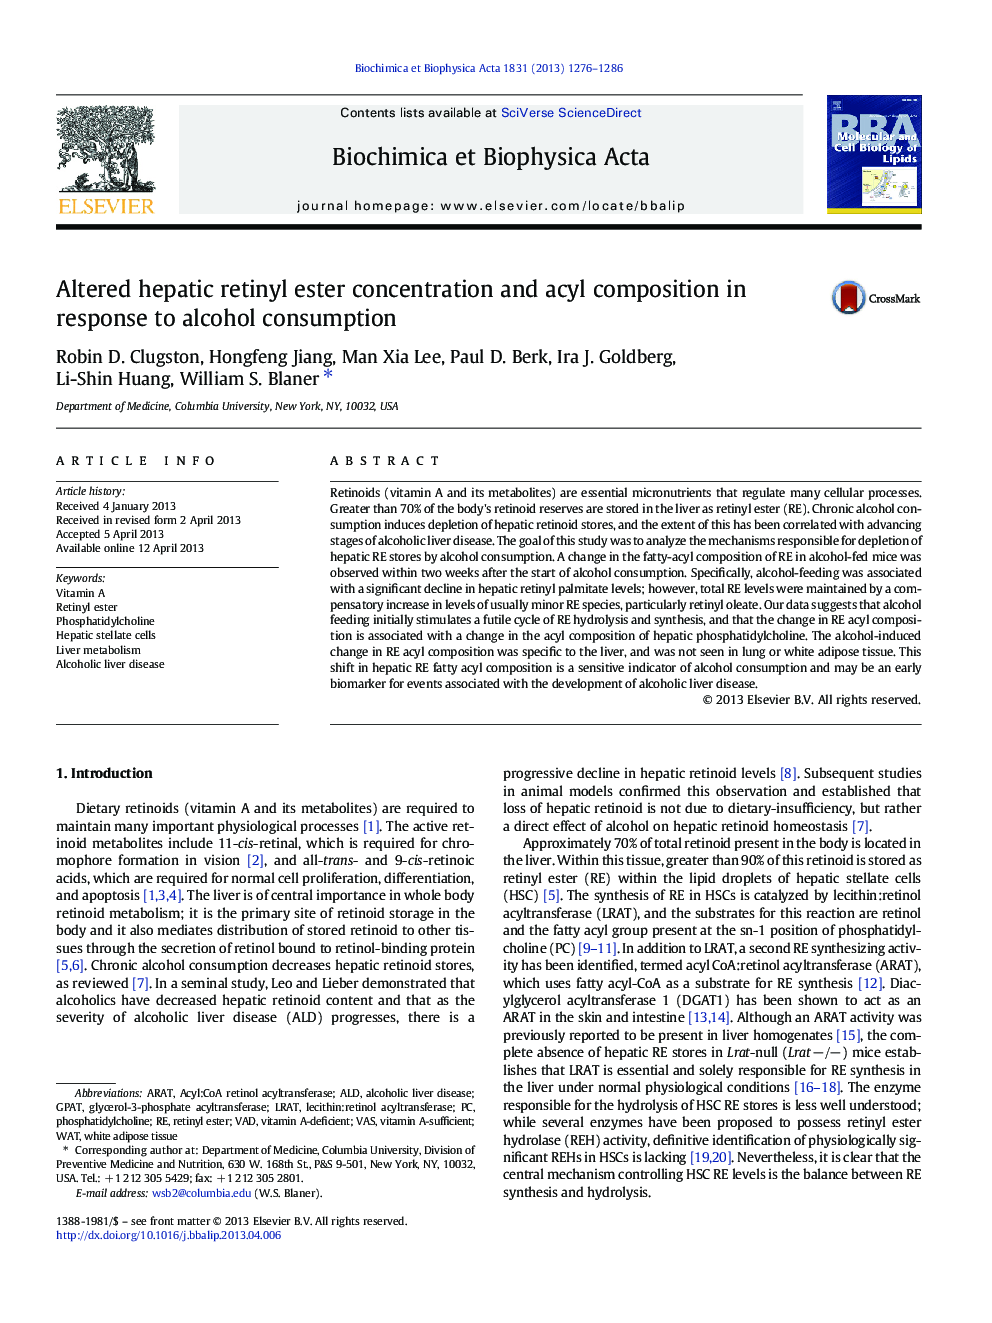 Altered hepatic retinyl ester concentration and acyl composition in response to alcohol consumption